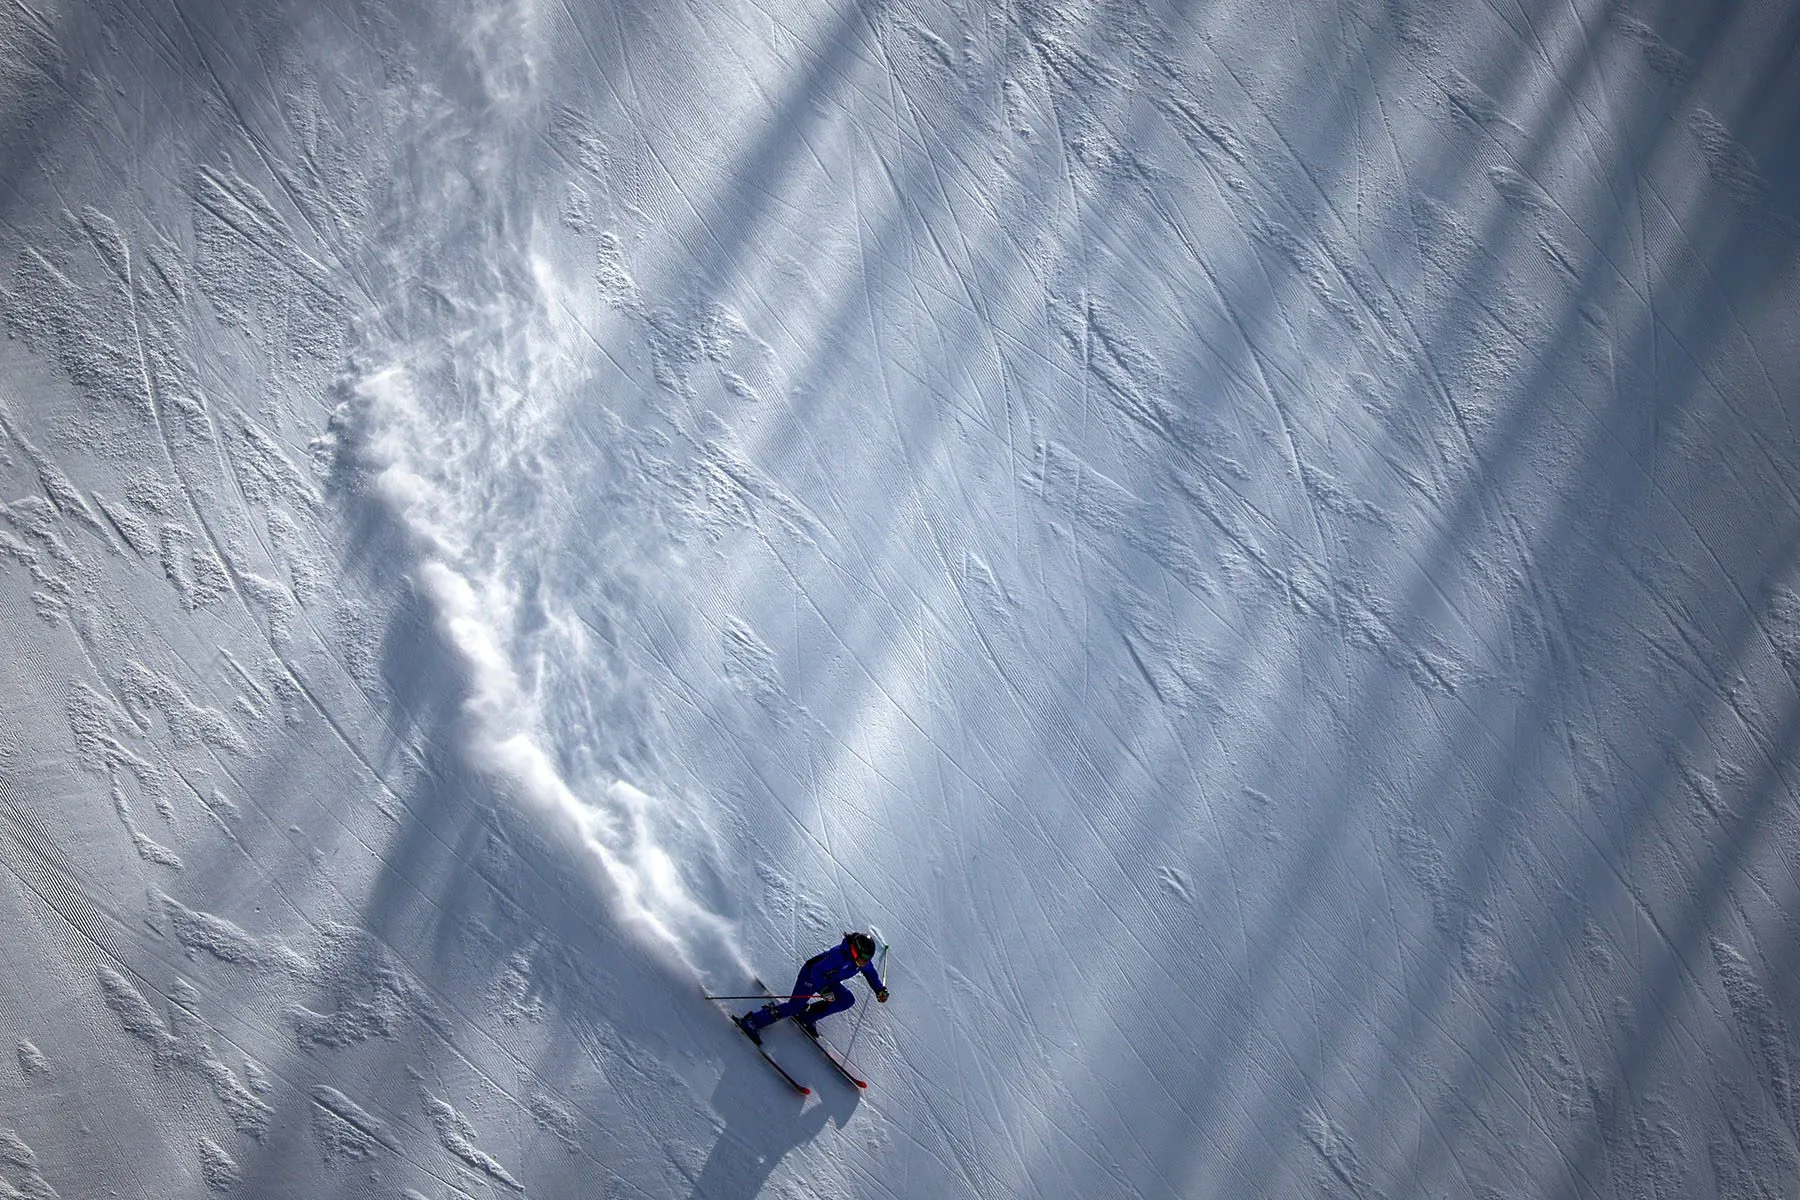 An athlete skies down a snowy slope during practice.